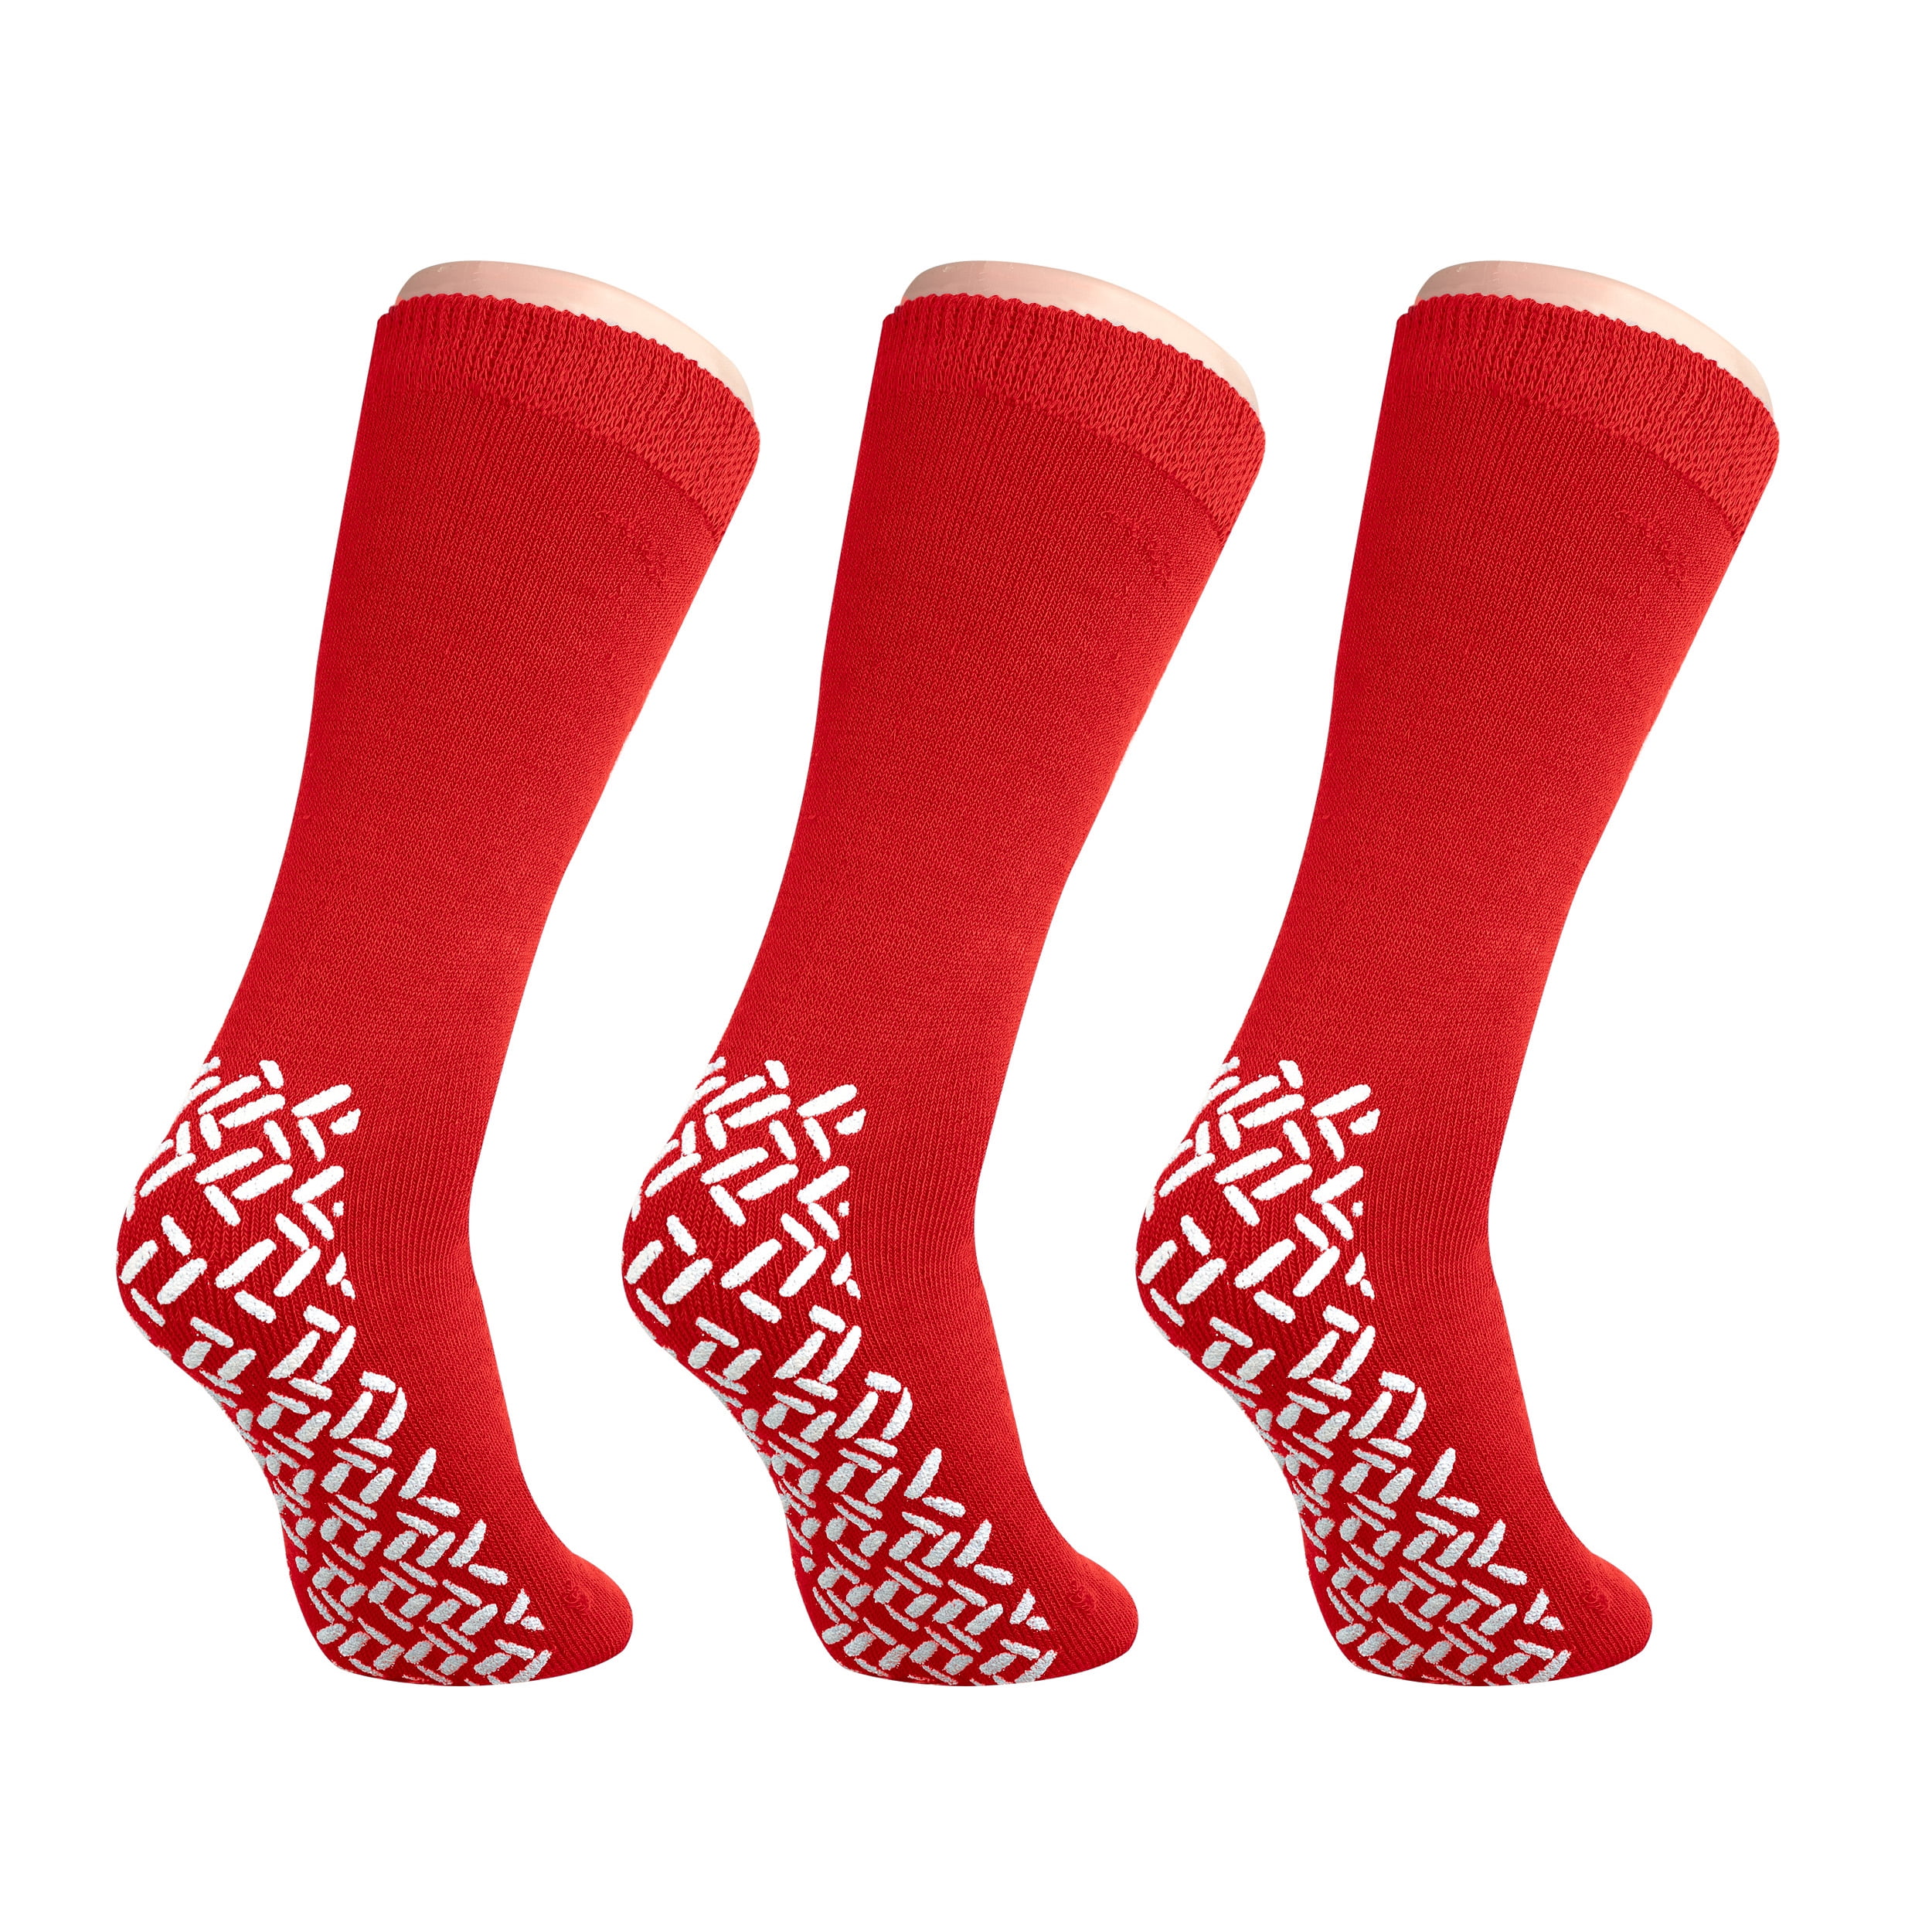  6 Pairs of Personal Touch Non Skid Hospital Slipper Socks with  Gripper Bottoms, Mid Calf, (Ladies Colors) : Clothing, Shoes & Jewelry